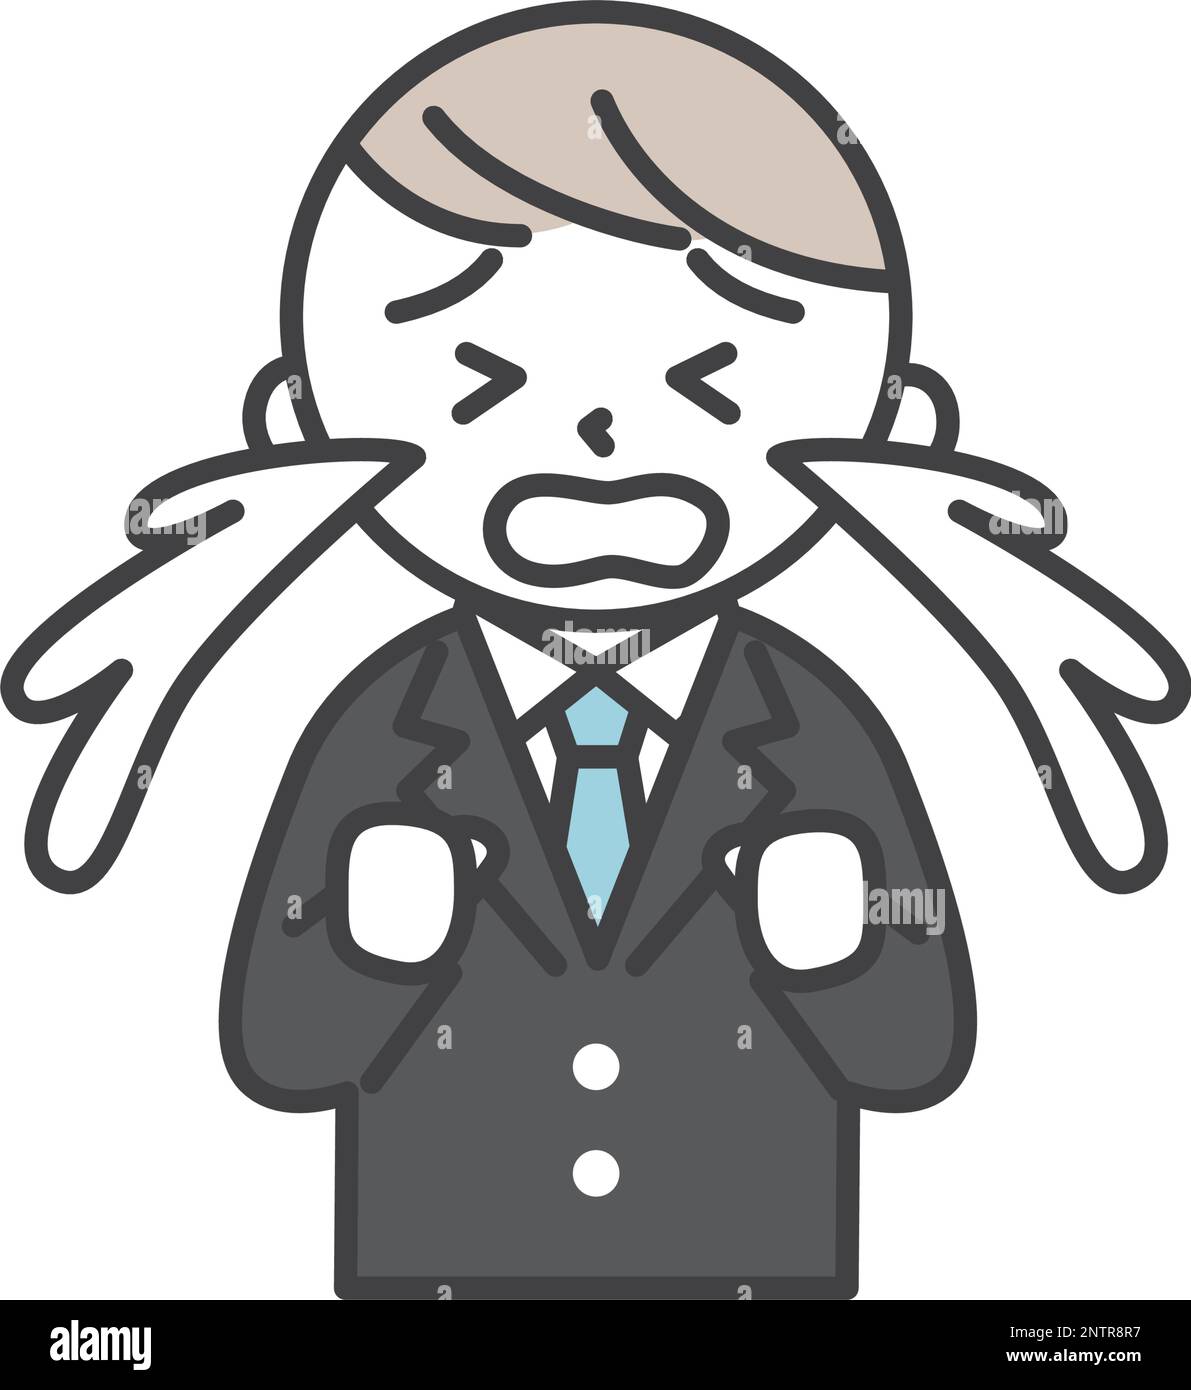 A male student crying with a lot of tears. Simple style illustrations with outlines. A male student wearing a blazer uniform. Stock Vector